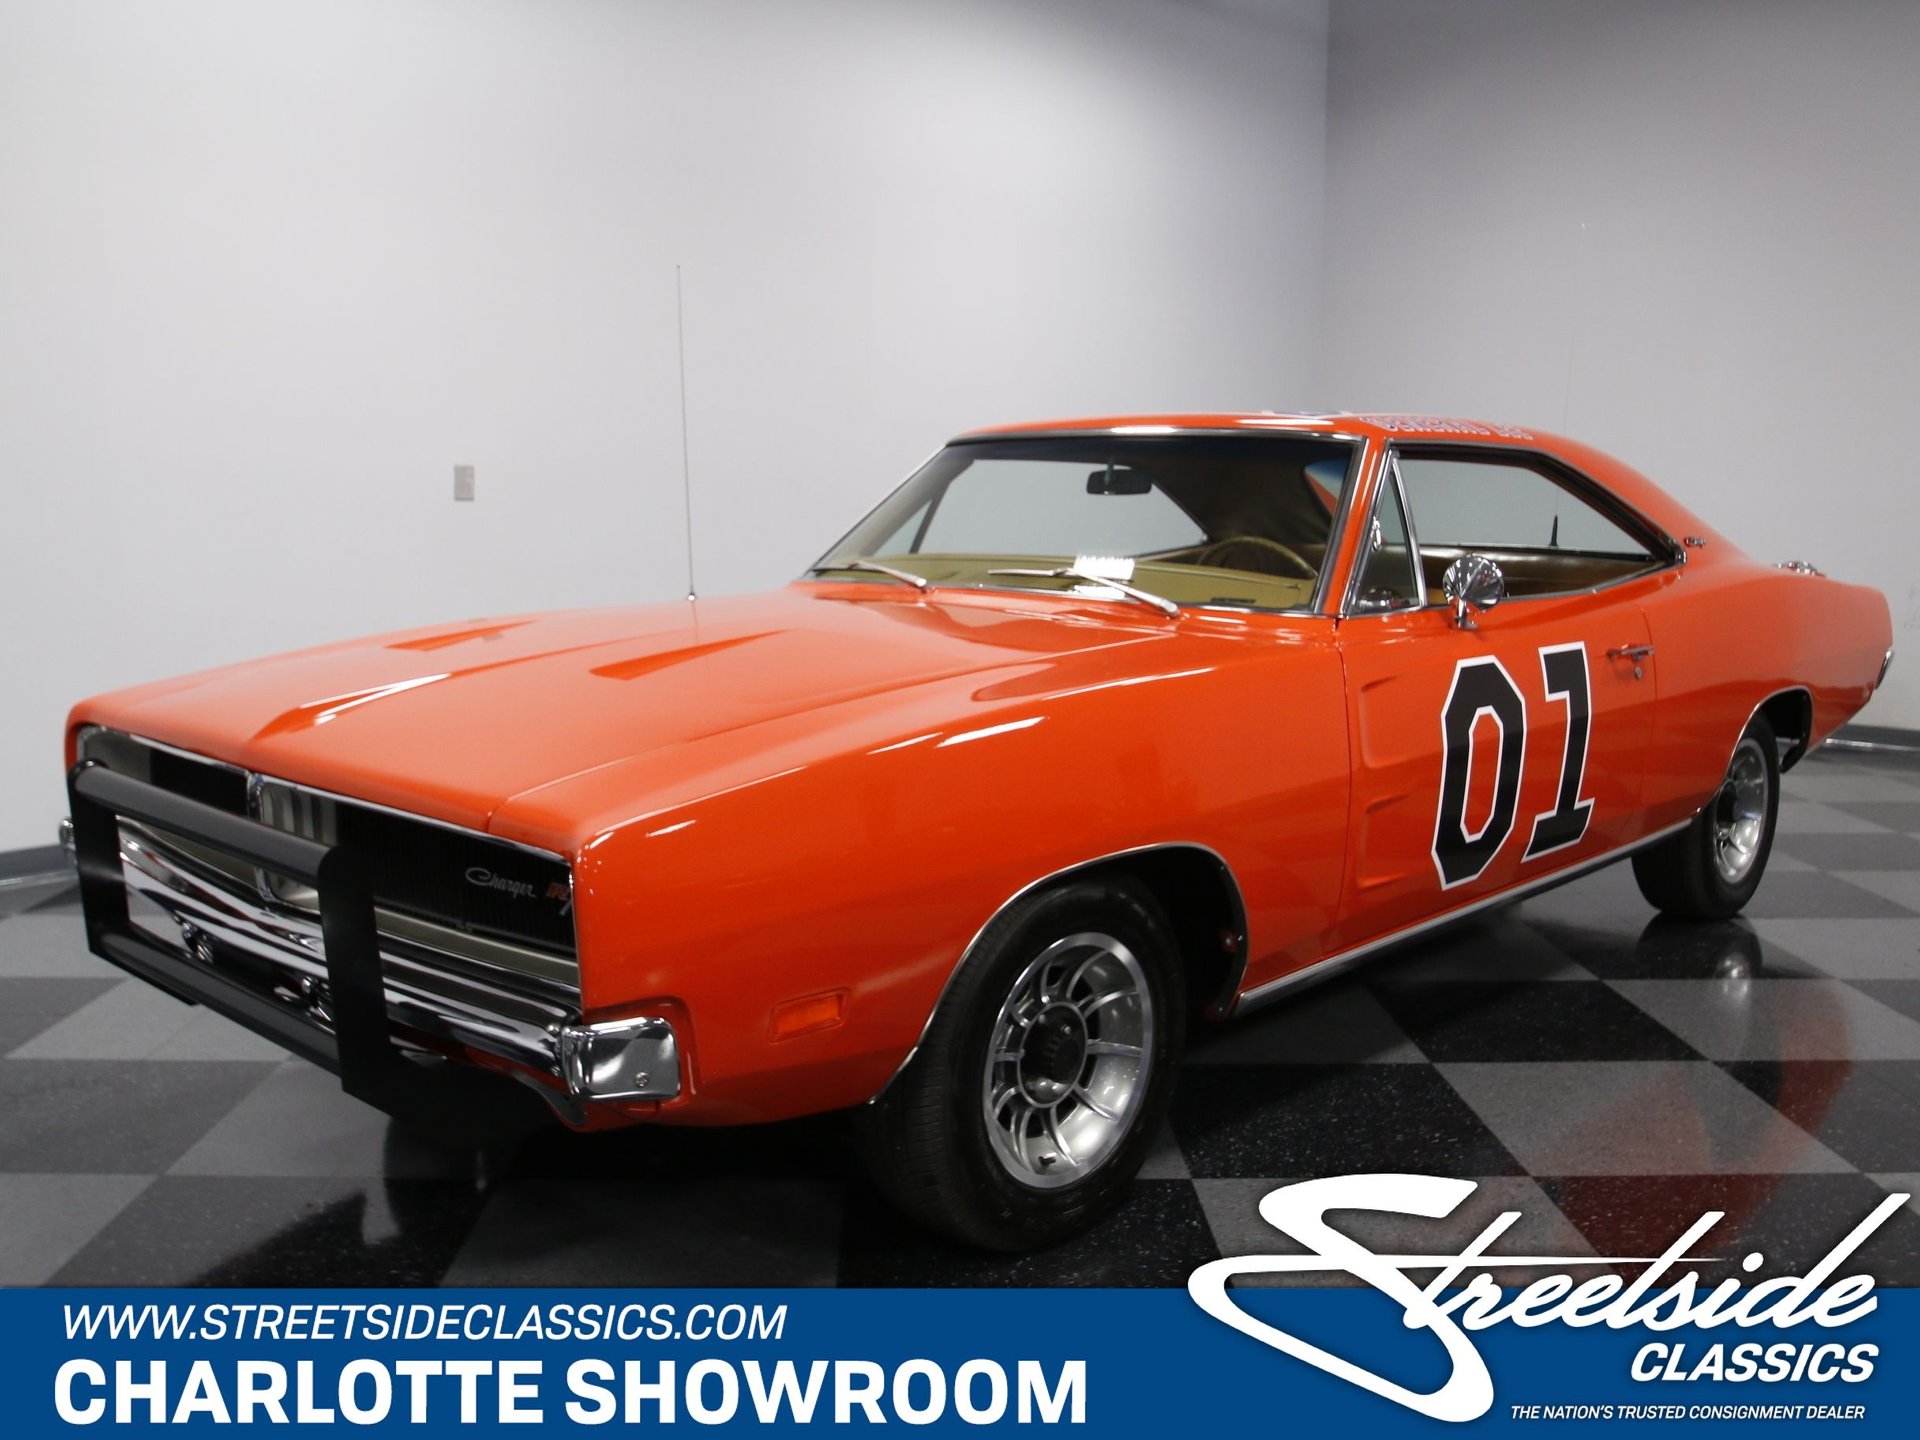 1969 Dodge Charger | Classic Cars for Sale - Streetside Classics